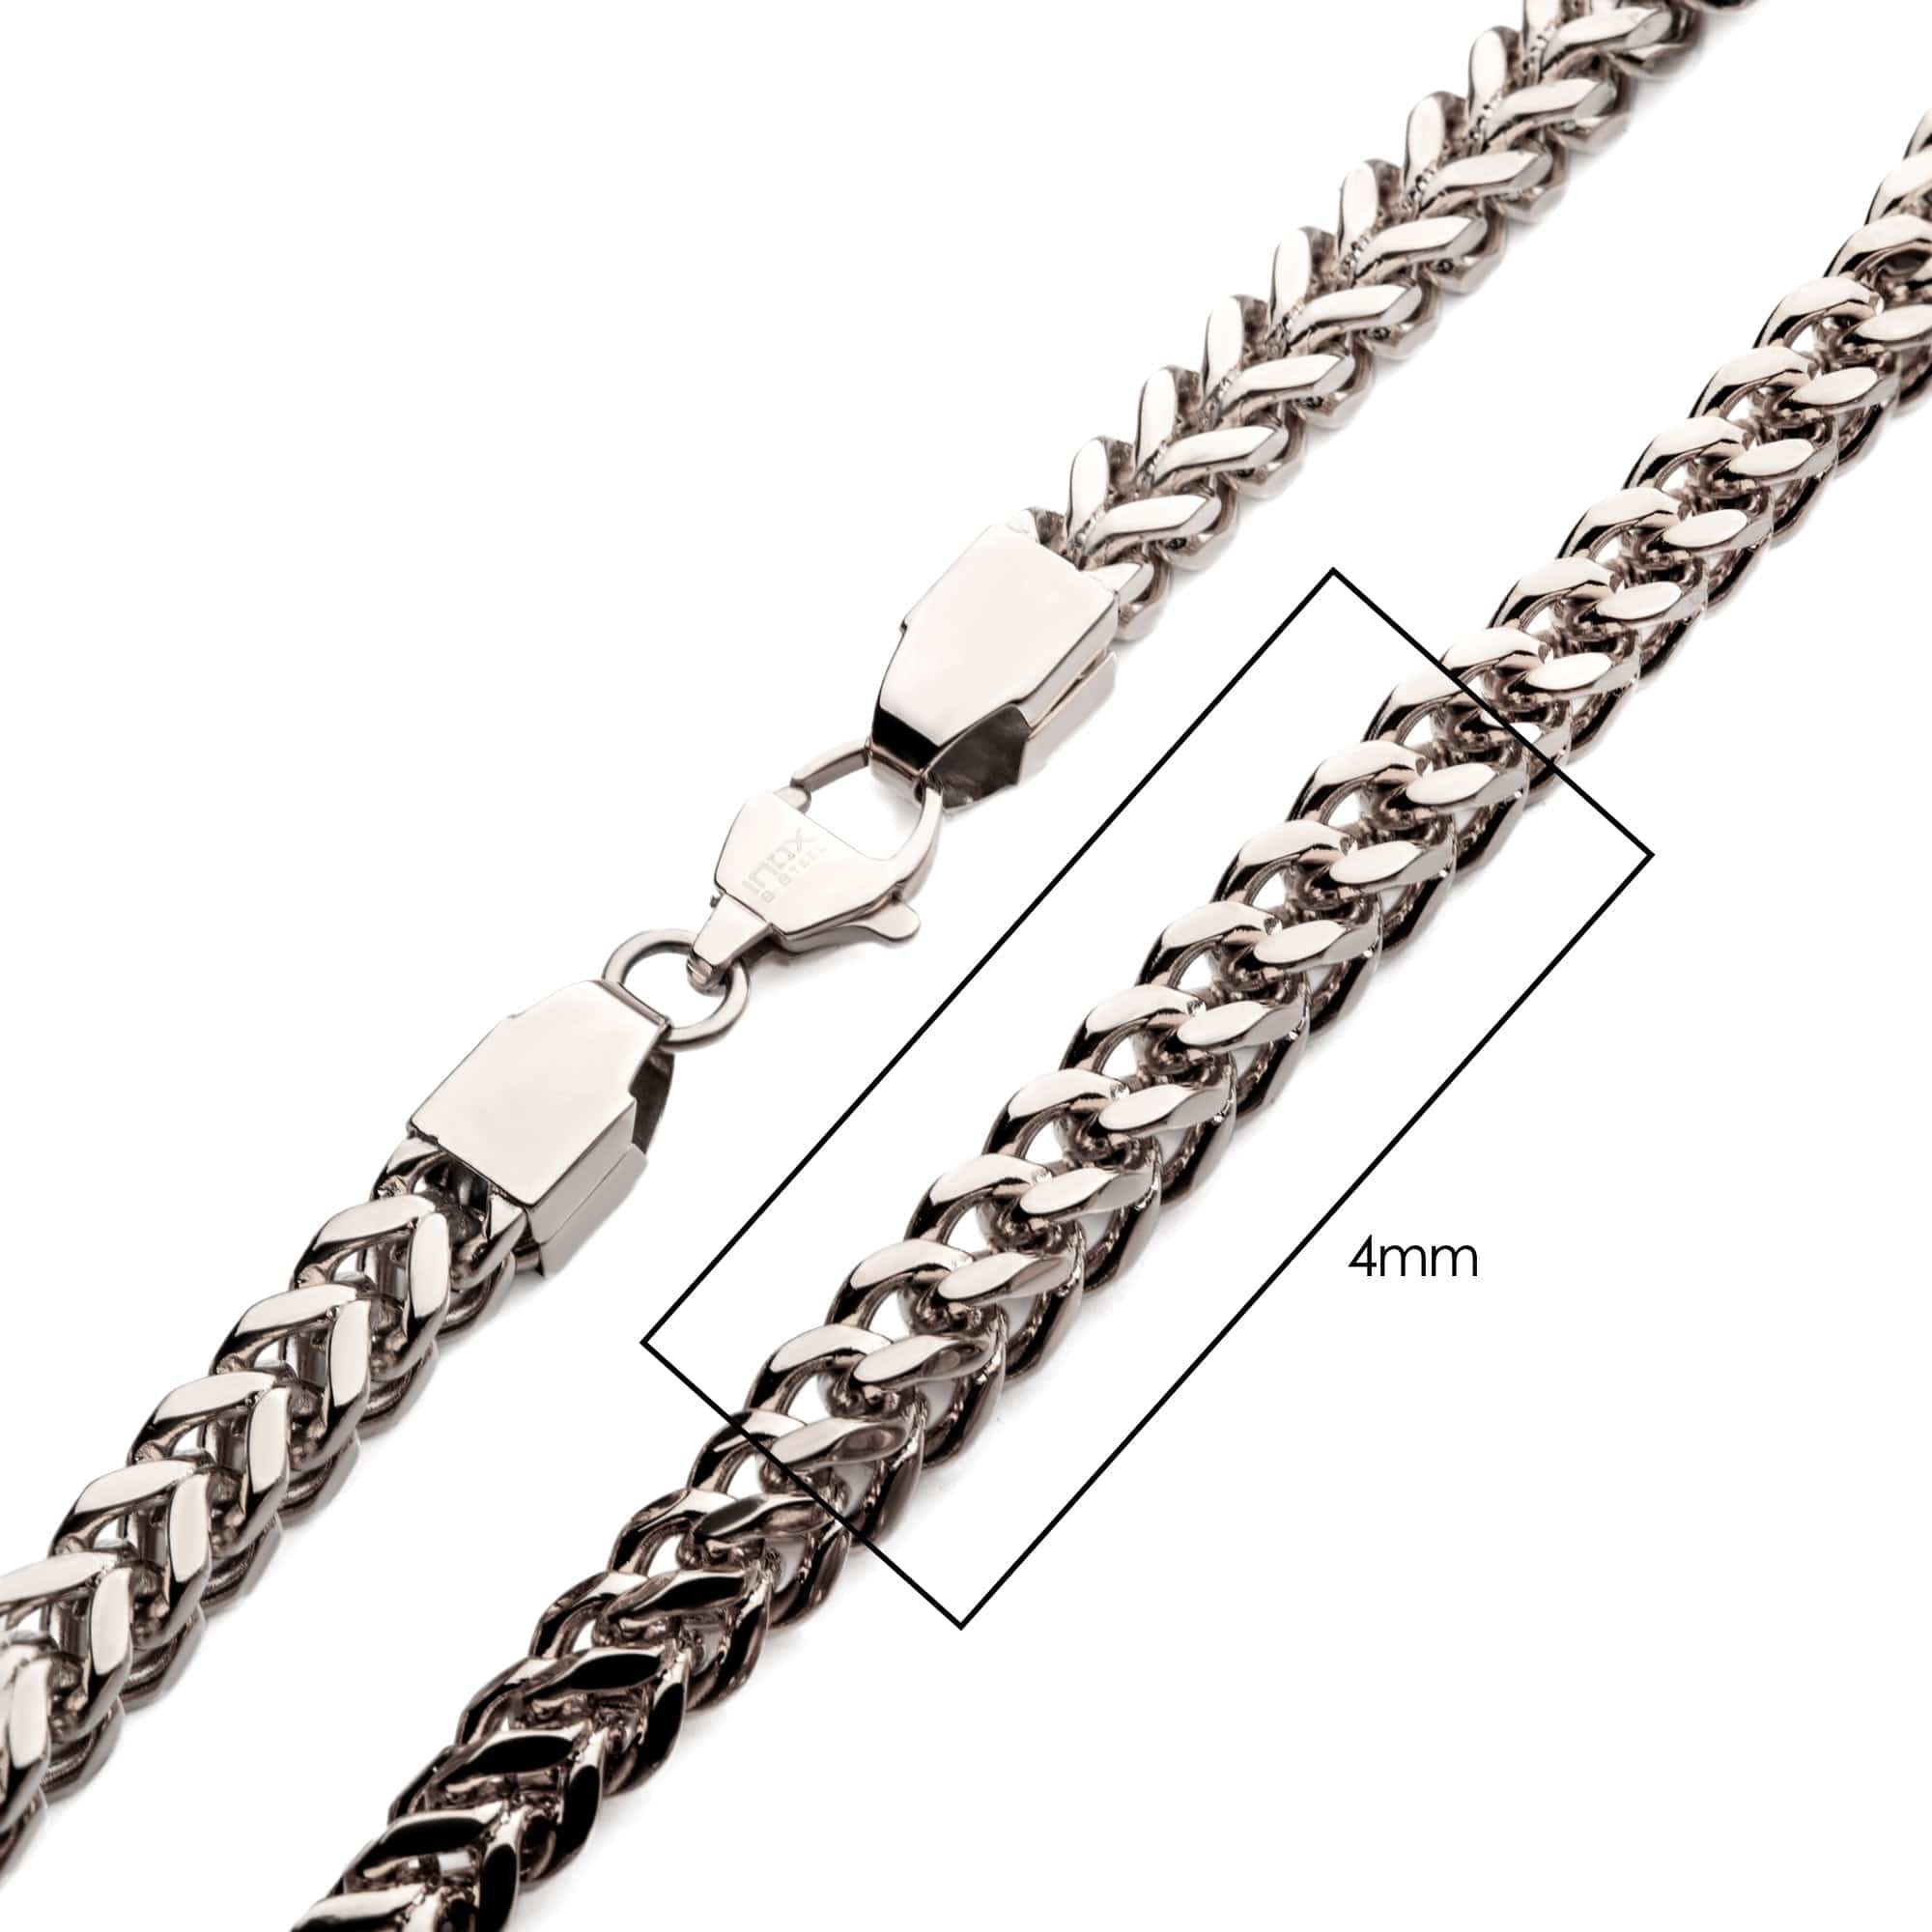 INOX JEWELRY Chains Silver Tone Stainless Steel 4mm Franco Link Chain